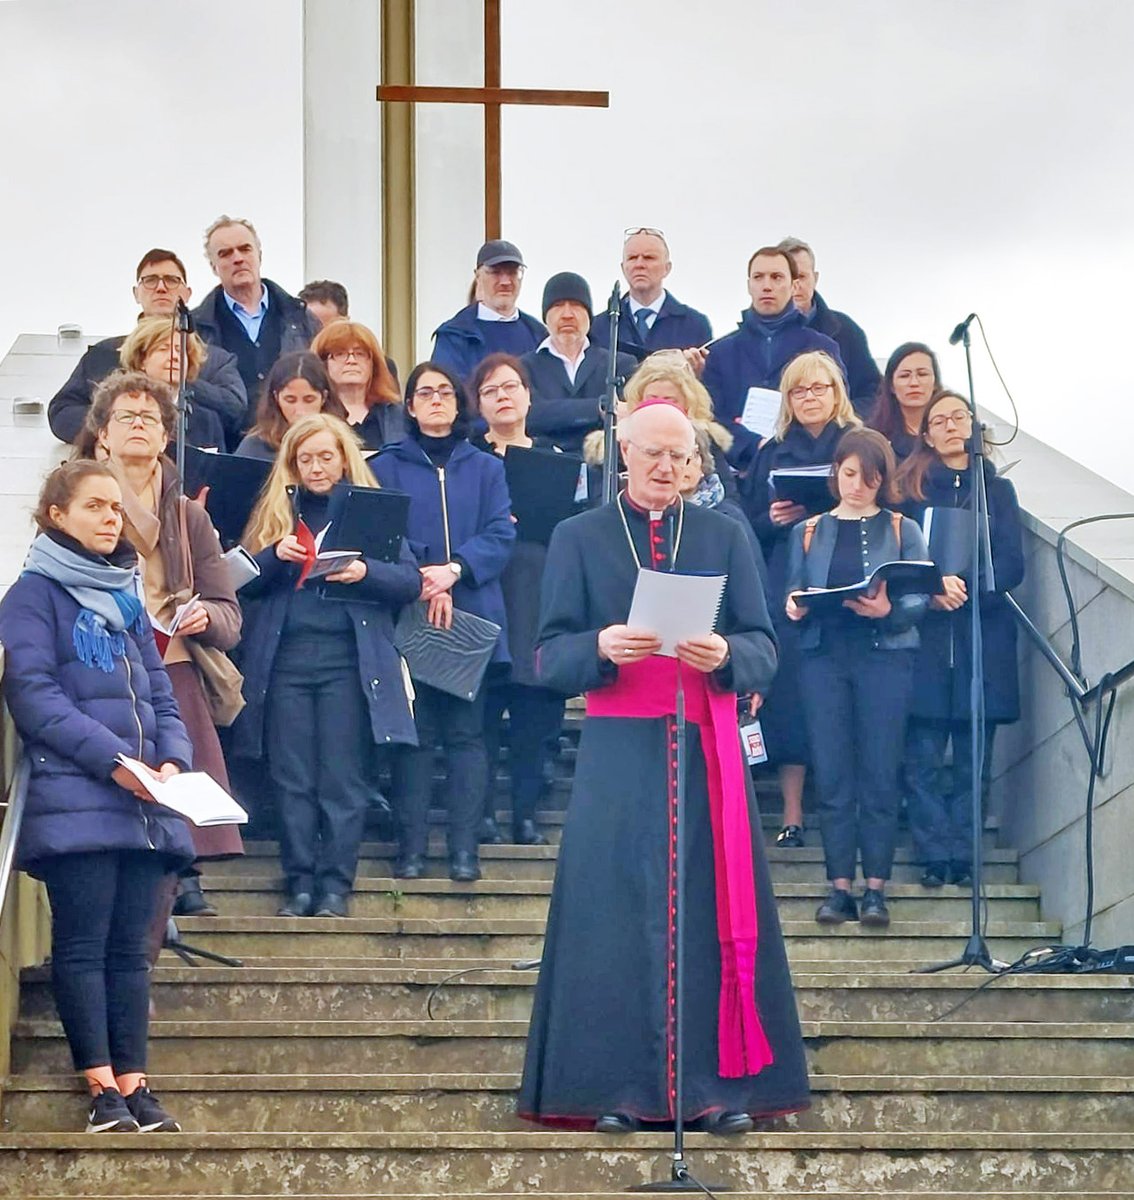 WAY OF THE CROSS The Way of the Cross led by the meditations of Archbishop Dermot Farrell and accompanied by the choir of Communion & Liberation will begin in Dublin’s Phoenix Park this Friday at midday. It will make its way from the Wellington Monument to the Papal Cross.